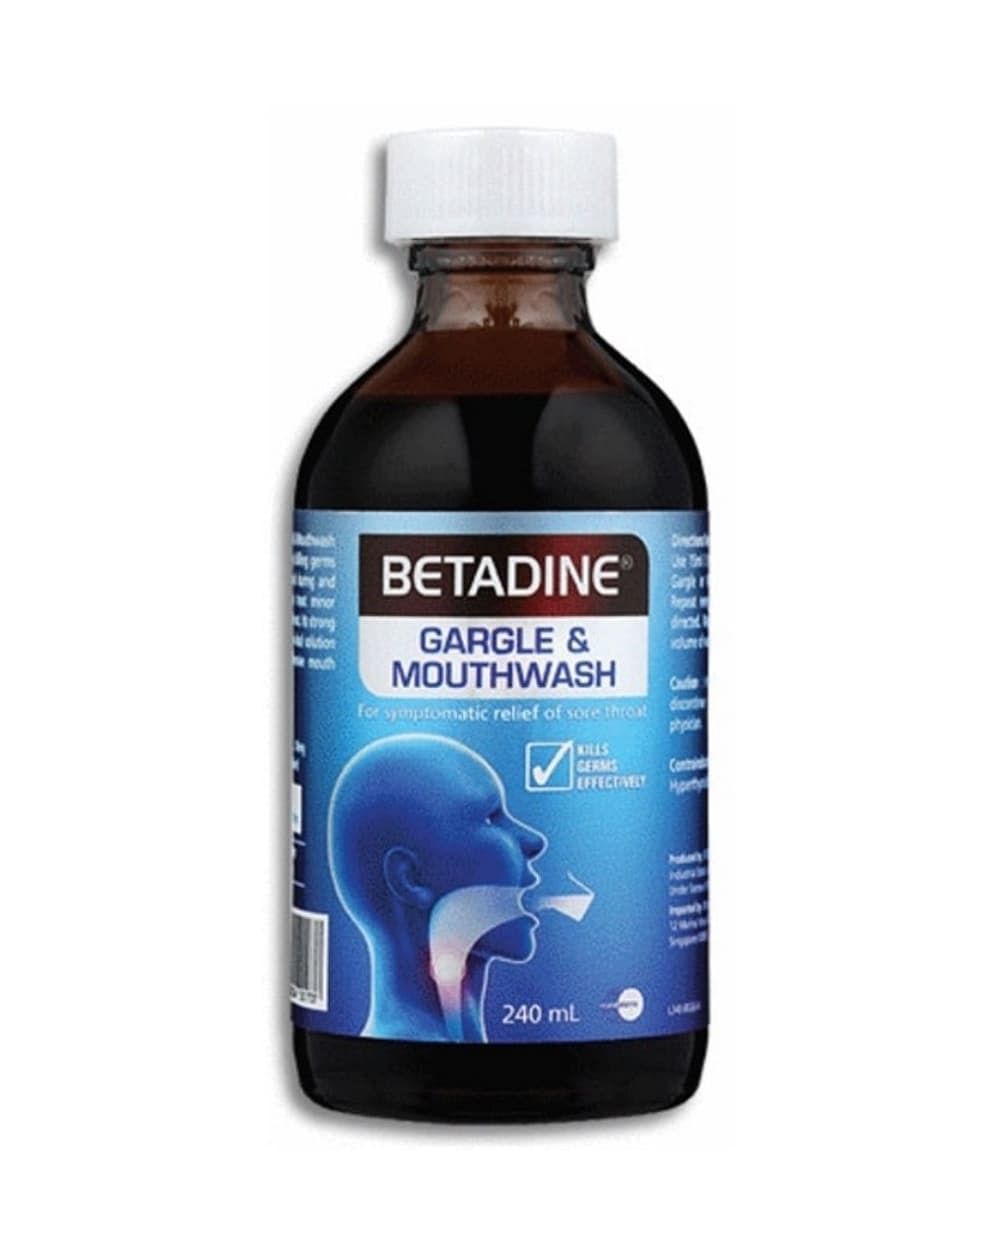 How to Use Betadine Gargle & What Are It's Benefits?